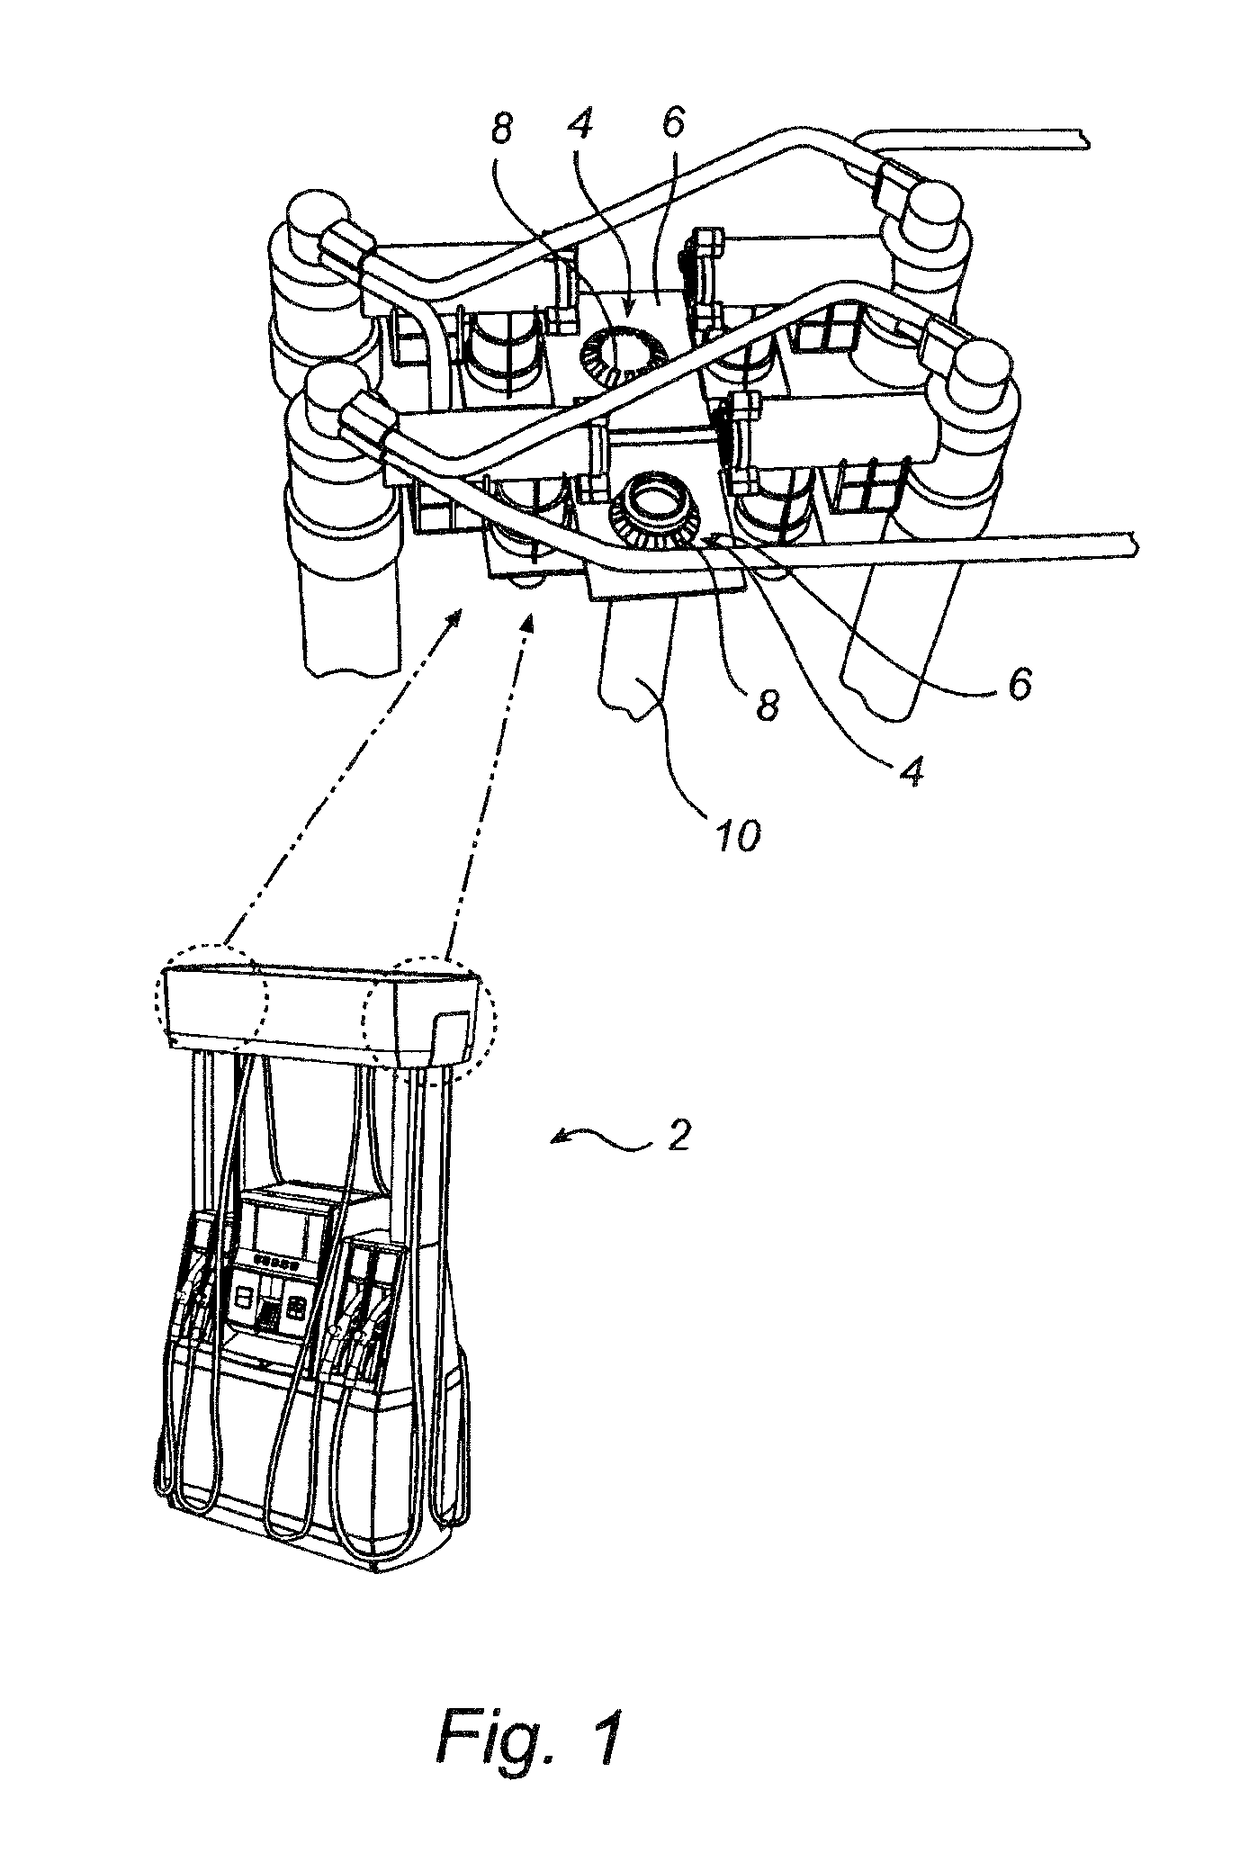 Fuel dispensing unit comprising a locking member for retaining a fuel conduit in a locked position